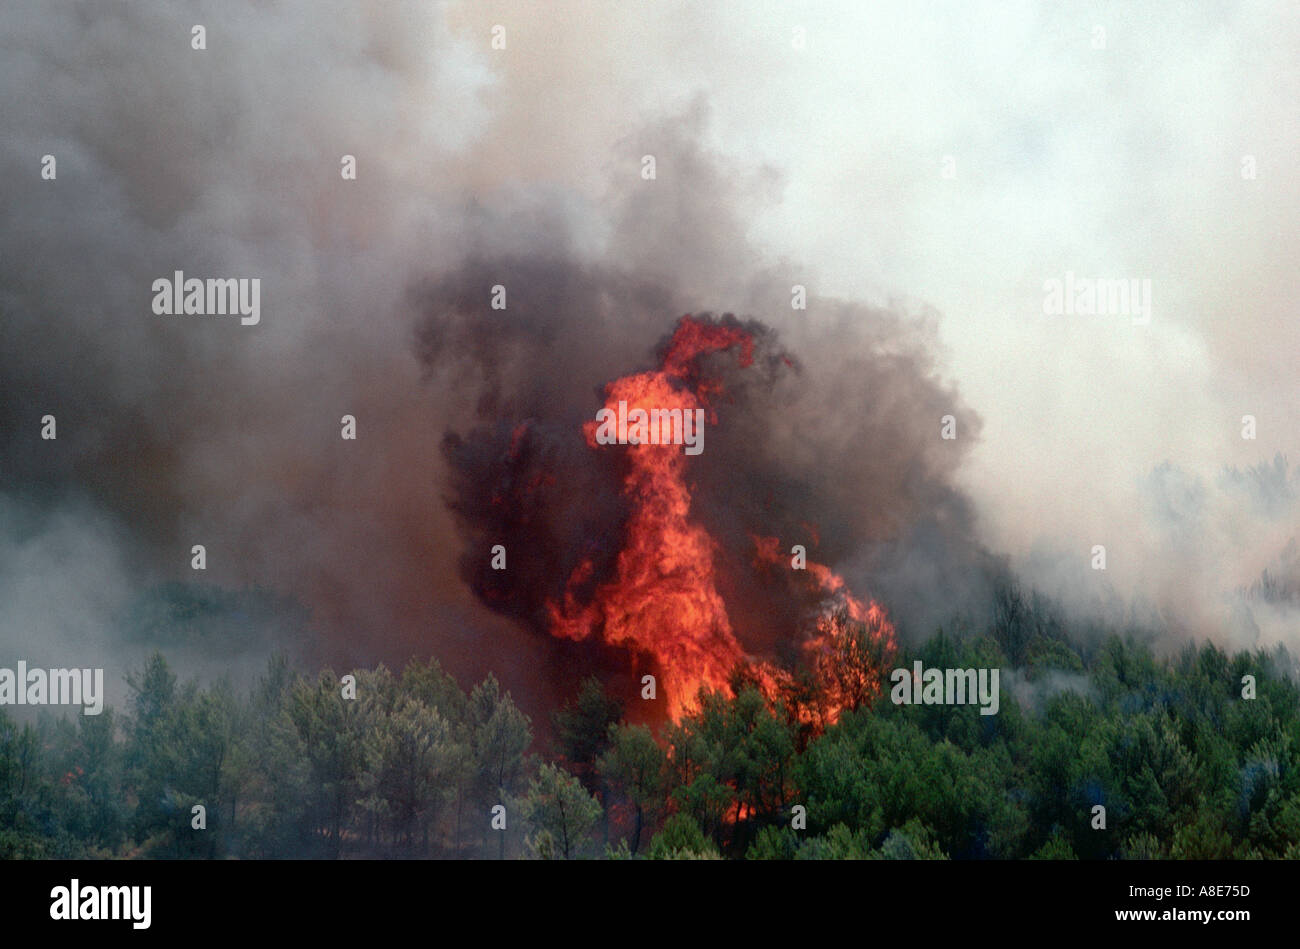 Aerial view of a wildfire, flames, forest fire black smoke, Bouches-du-Rhône, Provence, France, Europe, Stock Photo